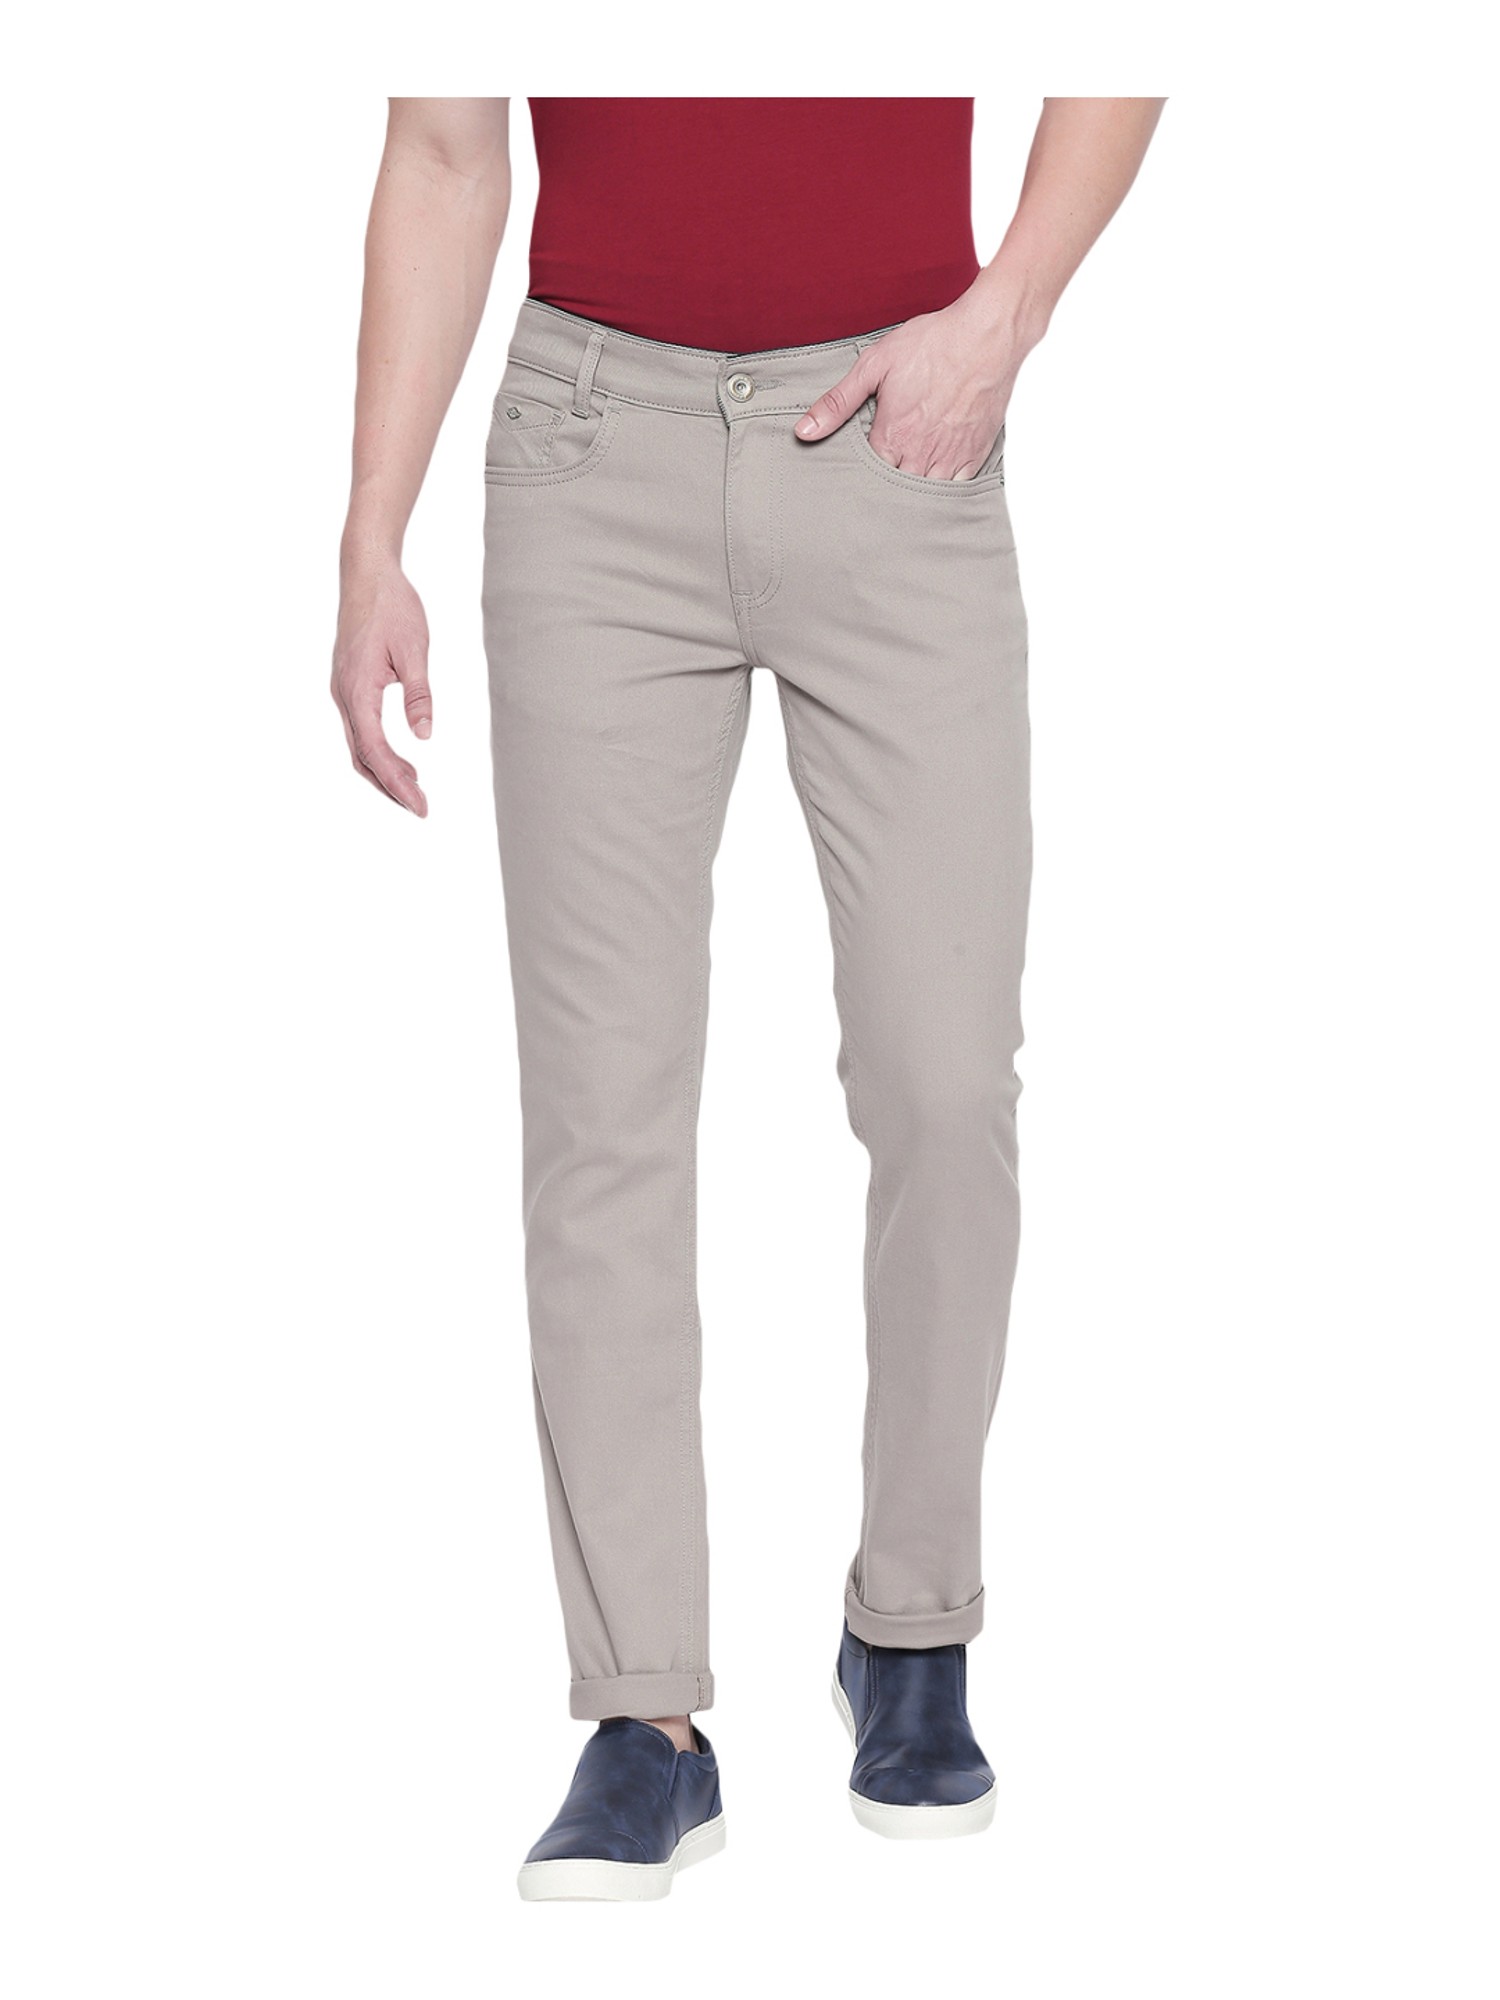 Buy Online Cotton Trousers for Men  Mufti